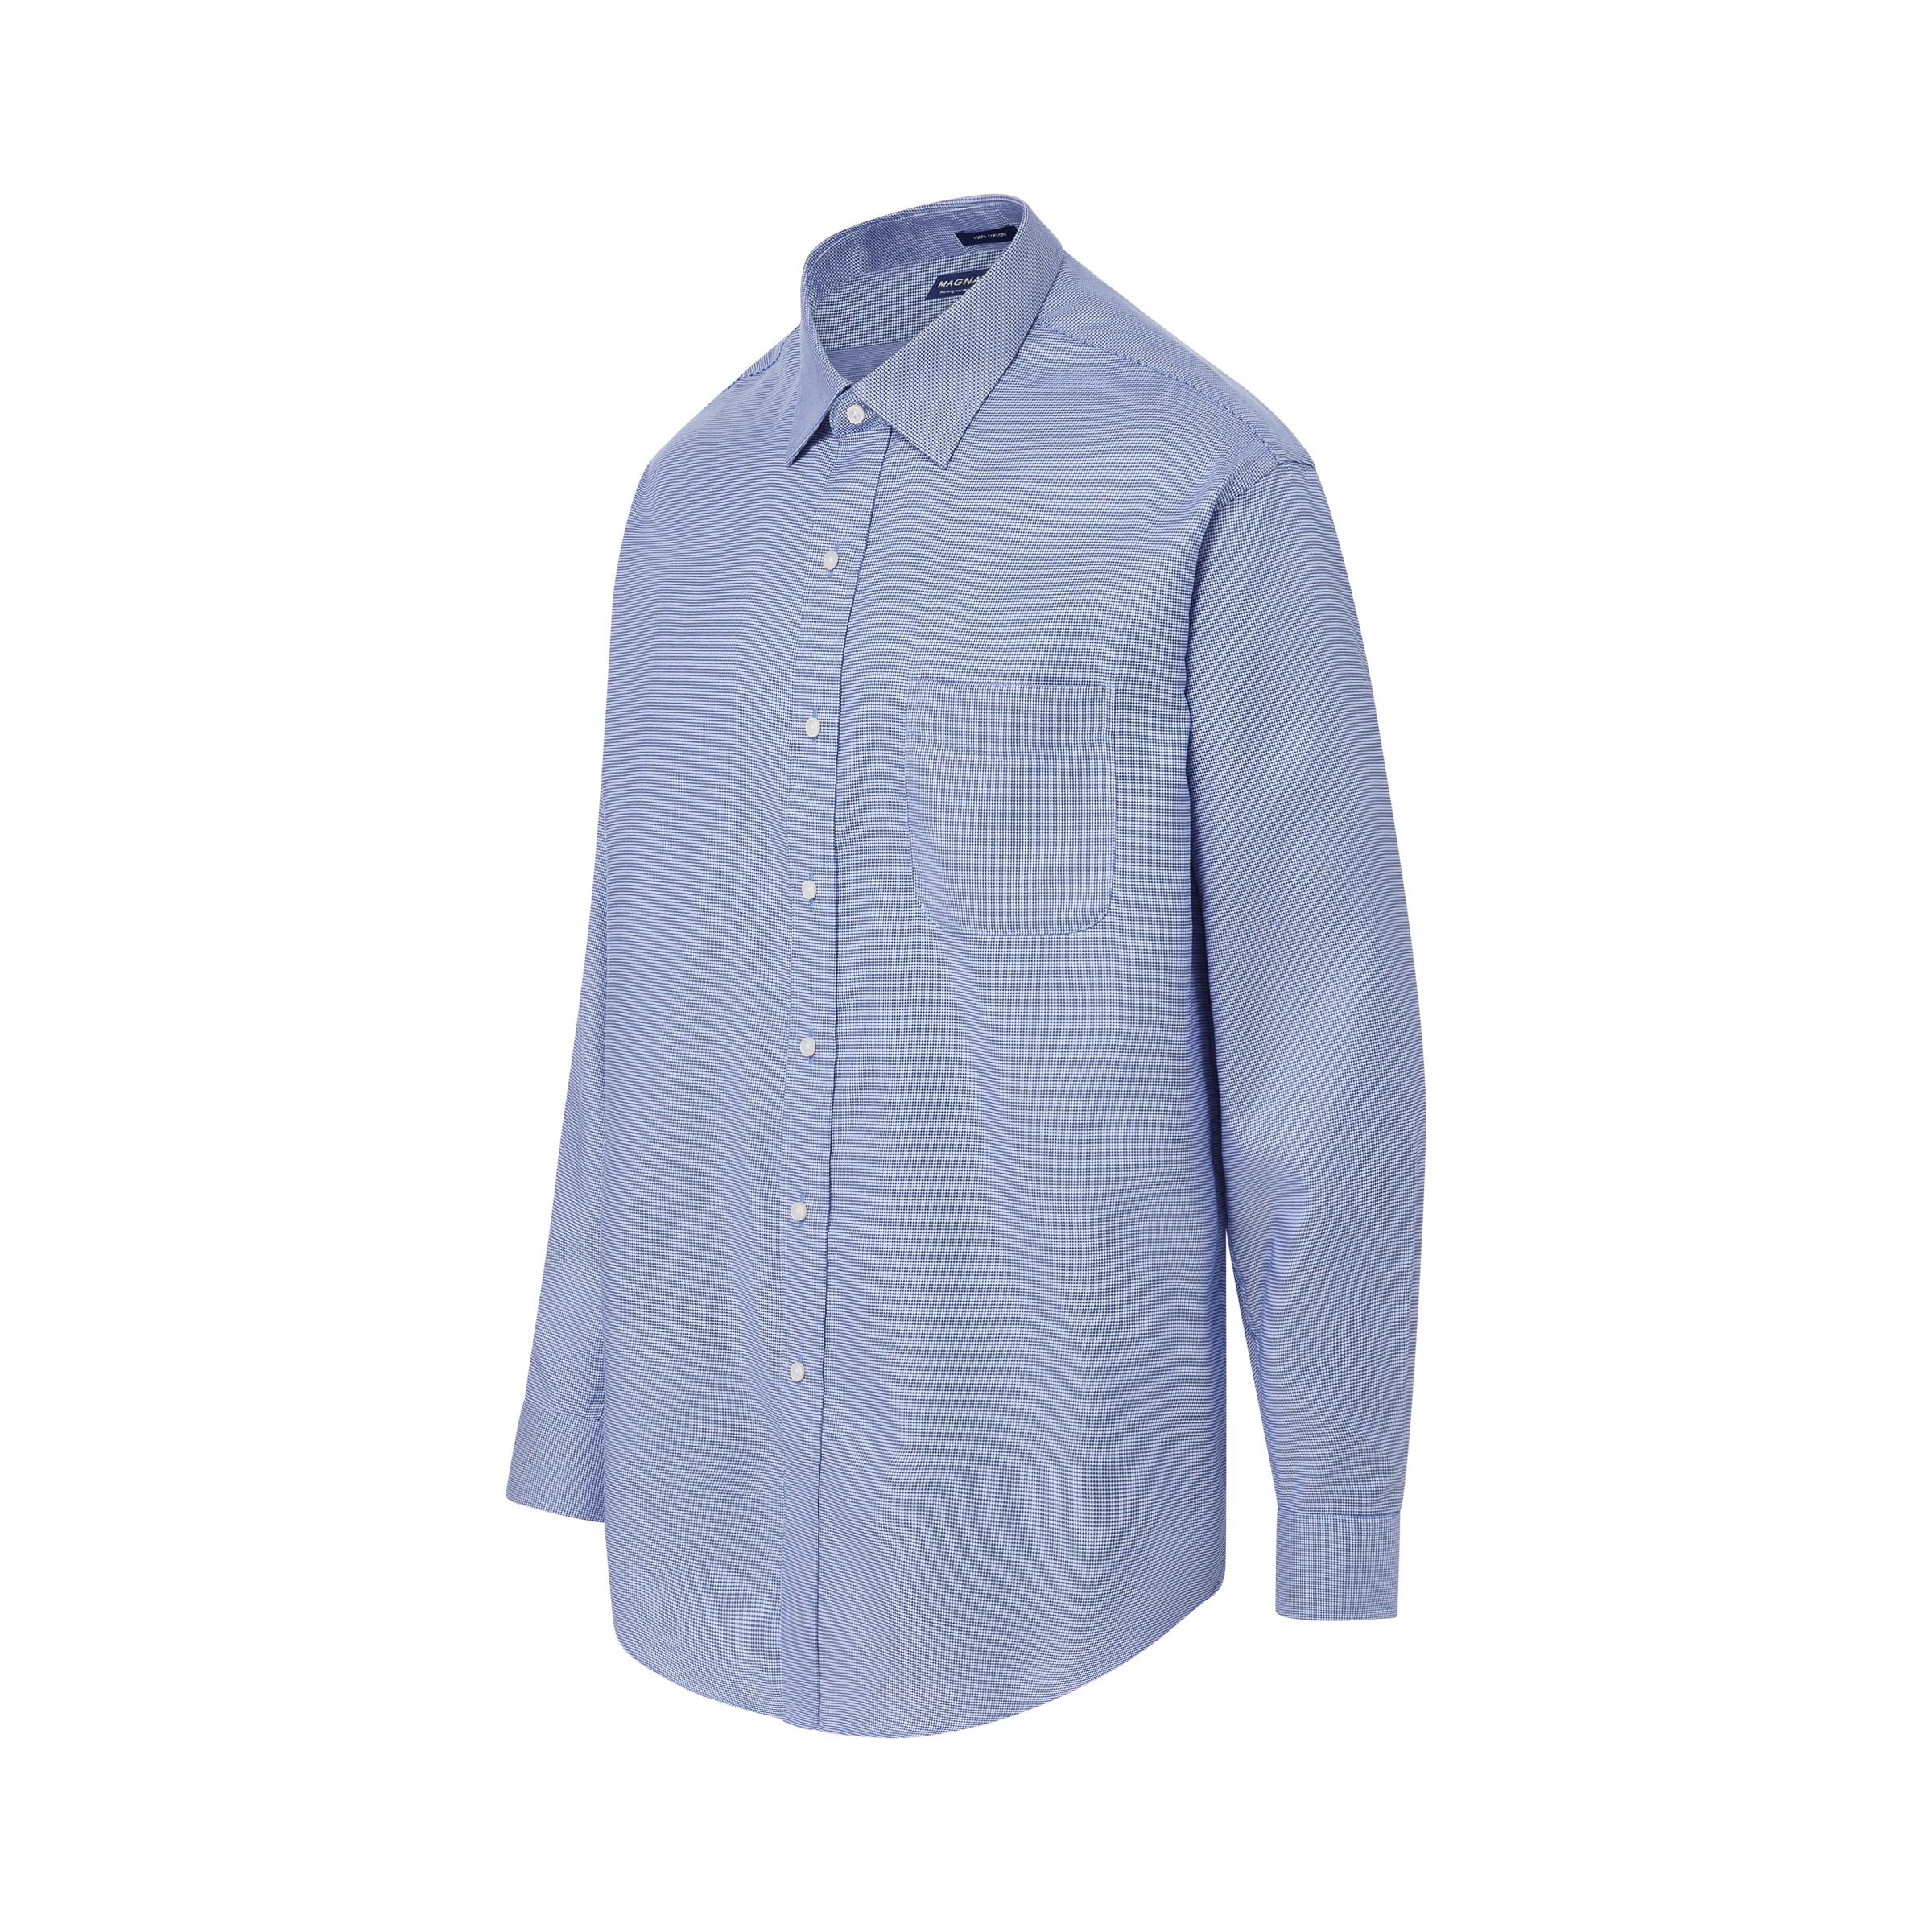 Long Sleeve Blue ‘Ryan’ Dress Shirt with Magnetic Closures